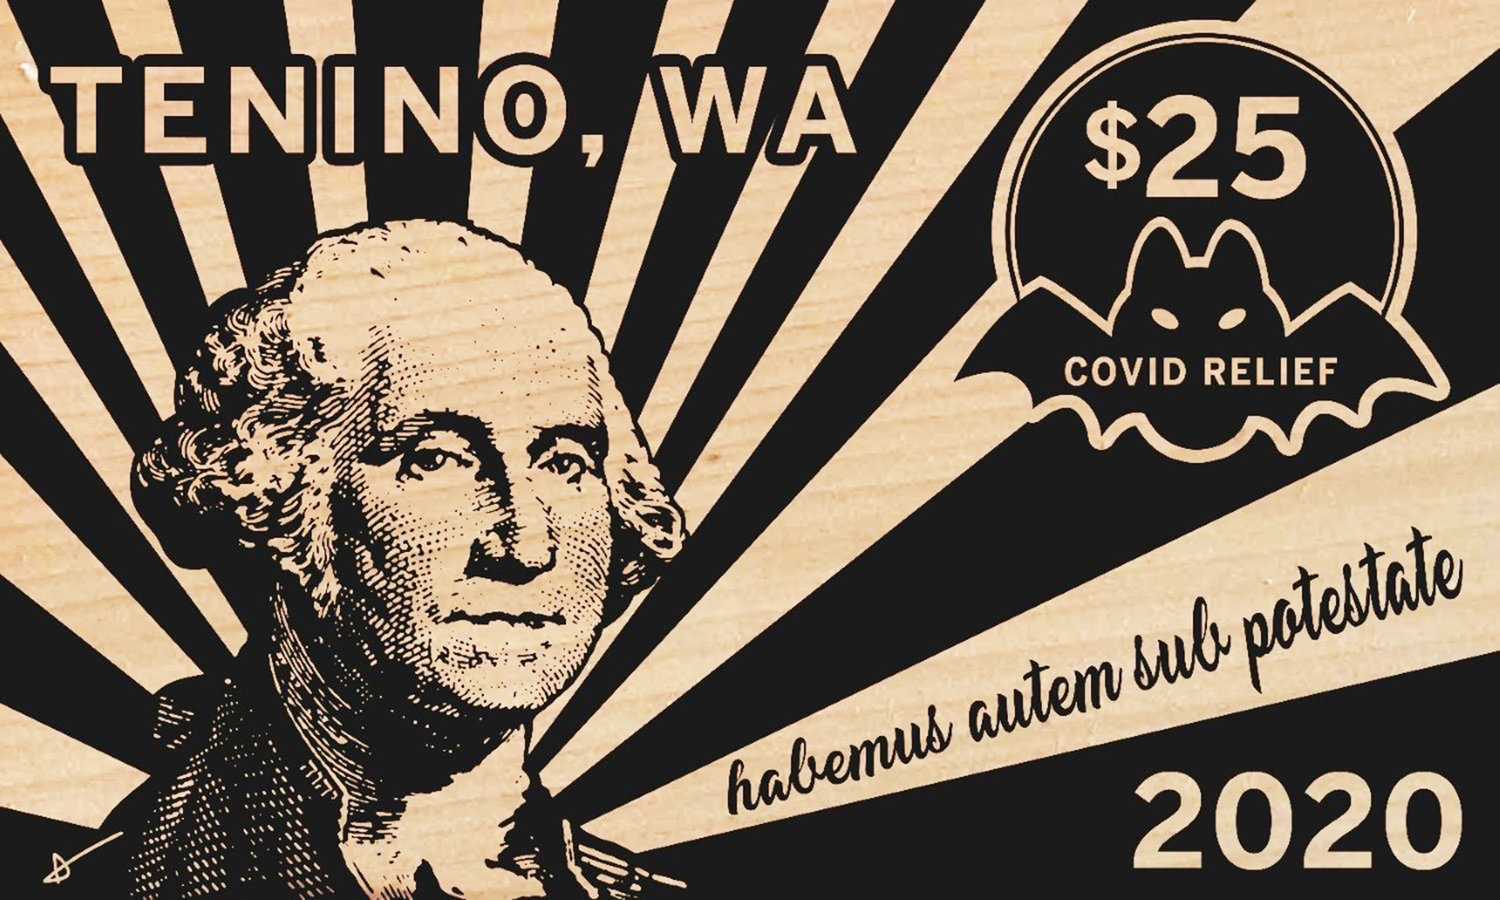 This wooden scrip will help some Tenino residents weather the hardships caused by COVID-19. 